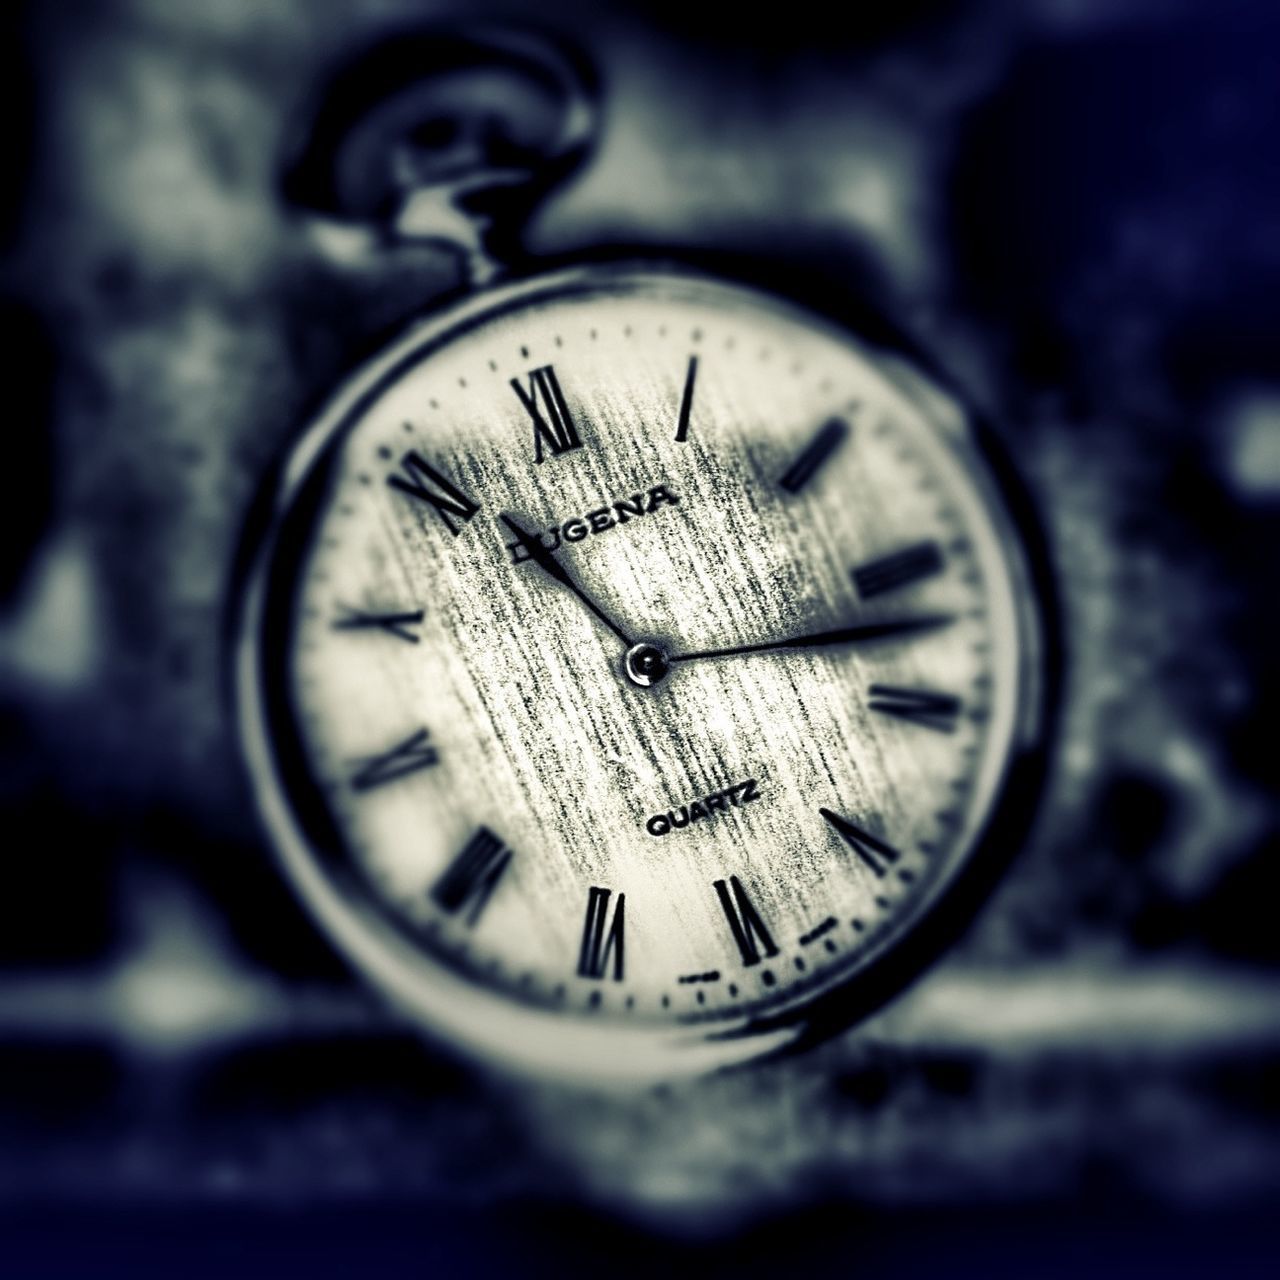 close-up, time, selective focus, number, focus on foreground, metal, circle, text, old, communication, clock, old-fashioned, single object, indoors, still life, antique, retro styled, no people, accuracy, technology